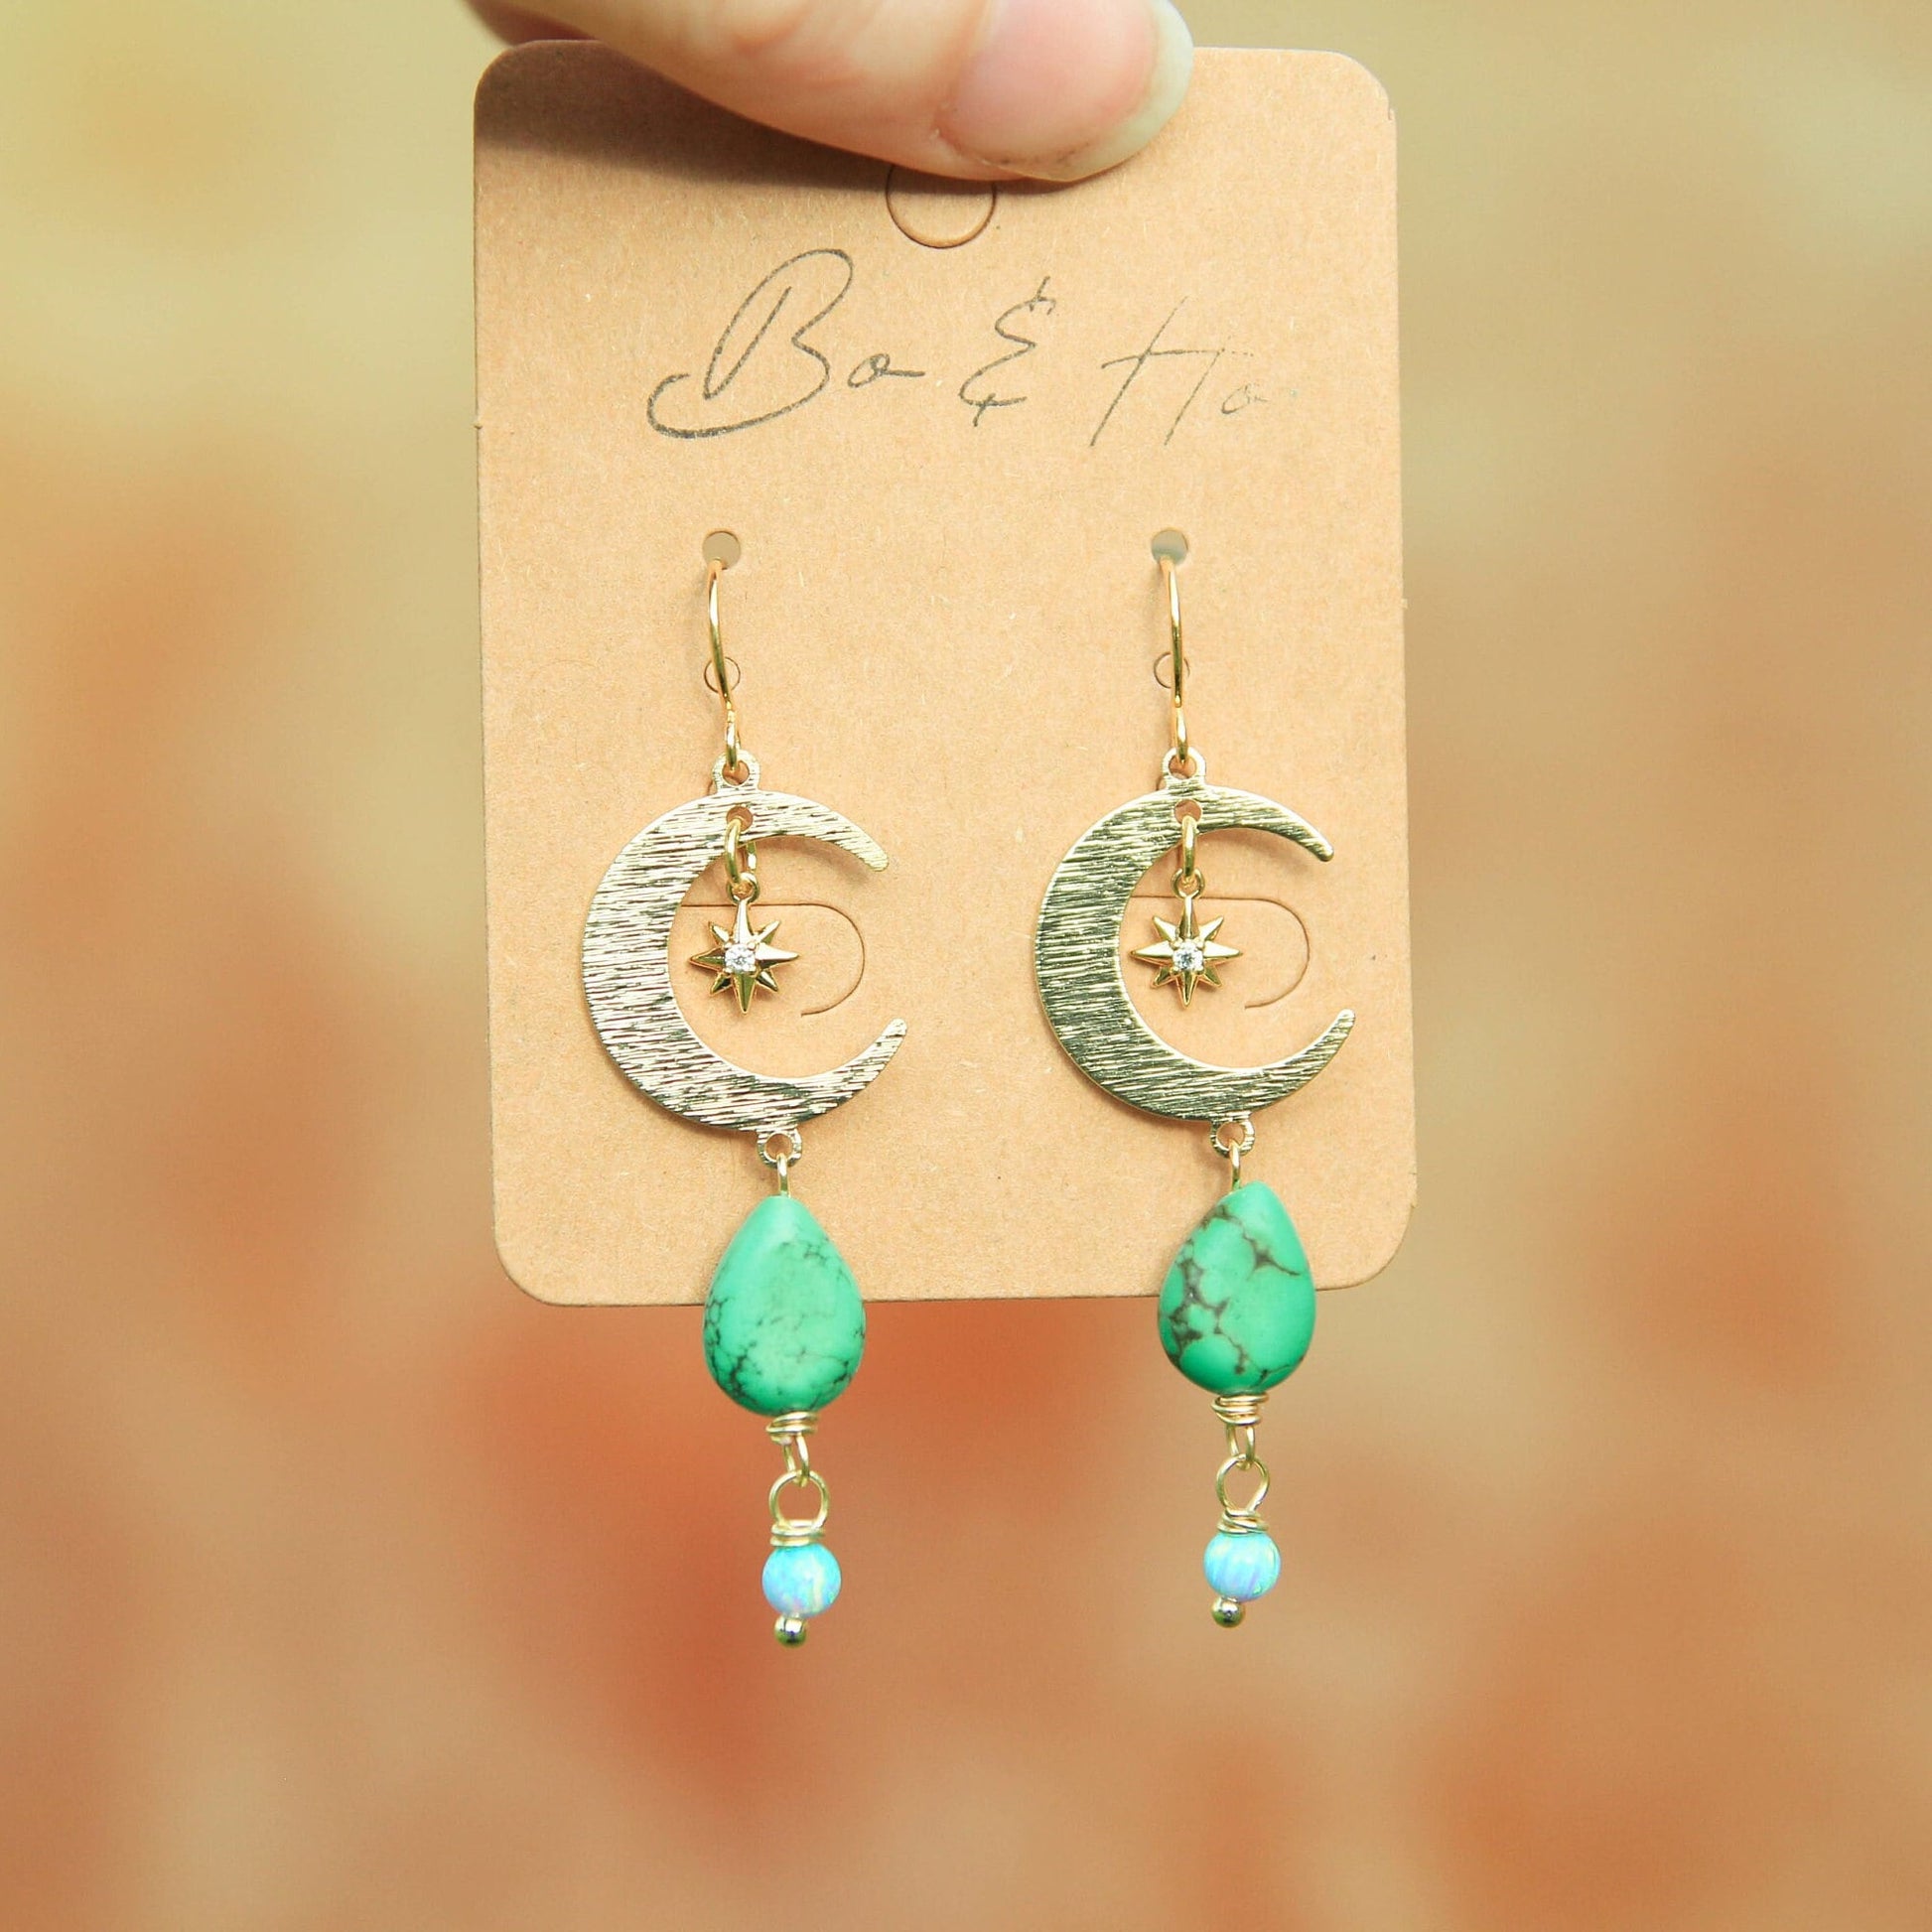 Gold Star and Moon Earrings with Turquoise and Opal